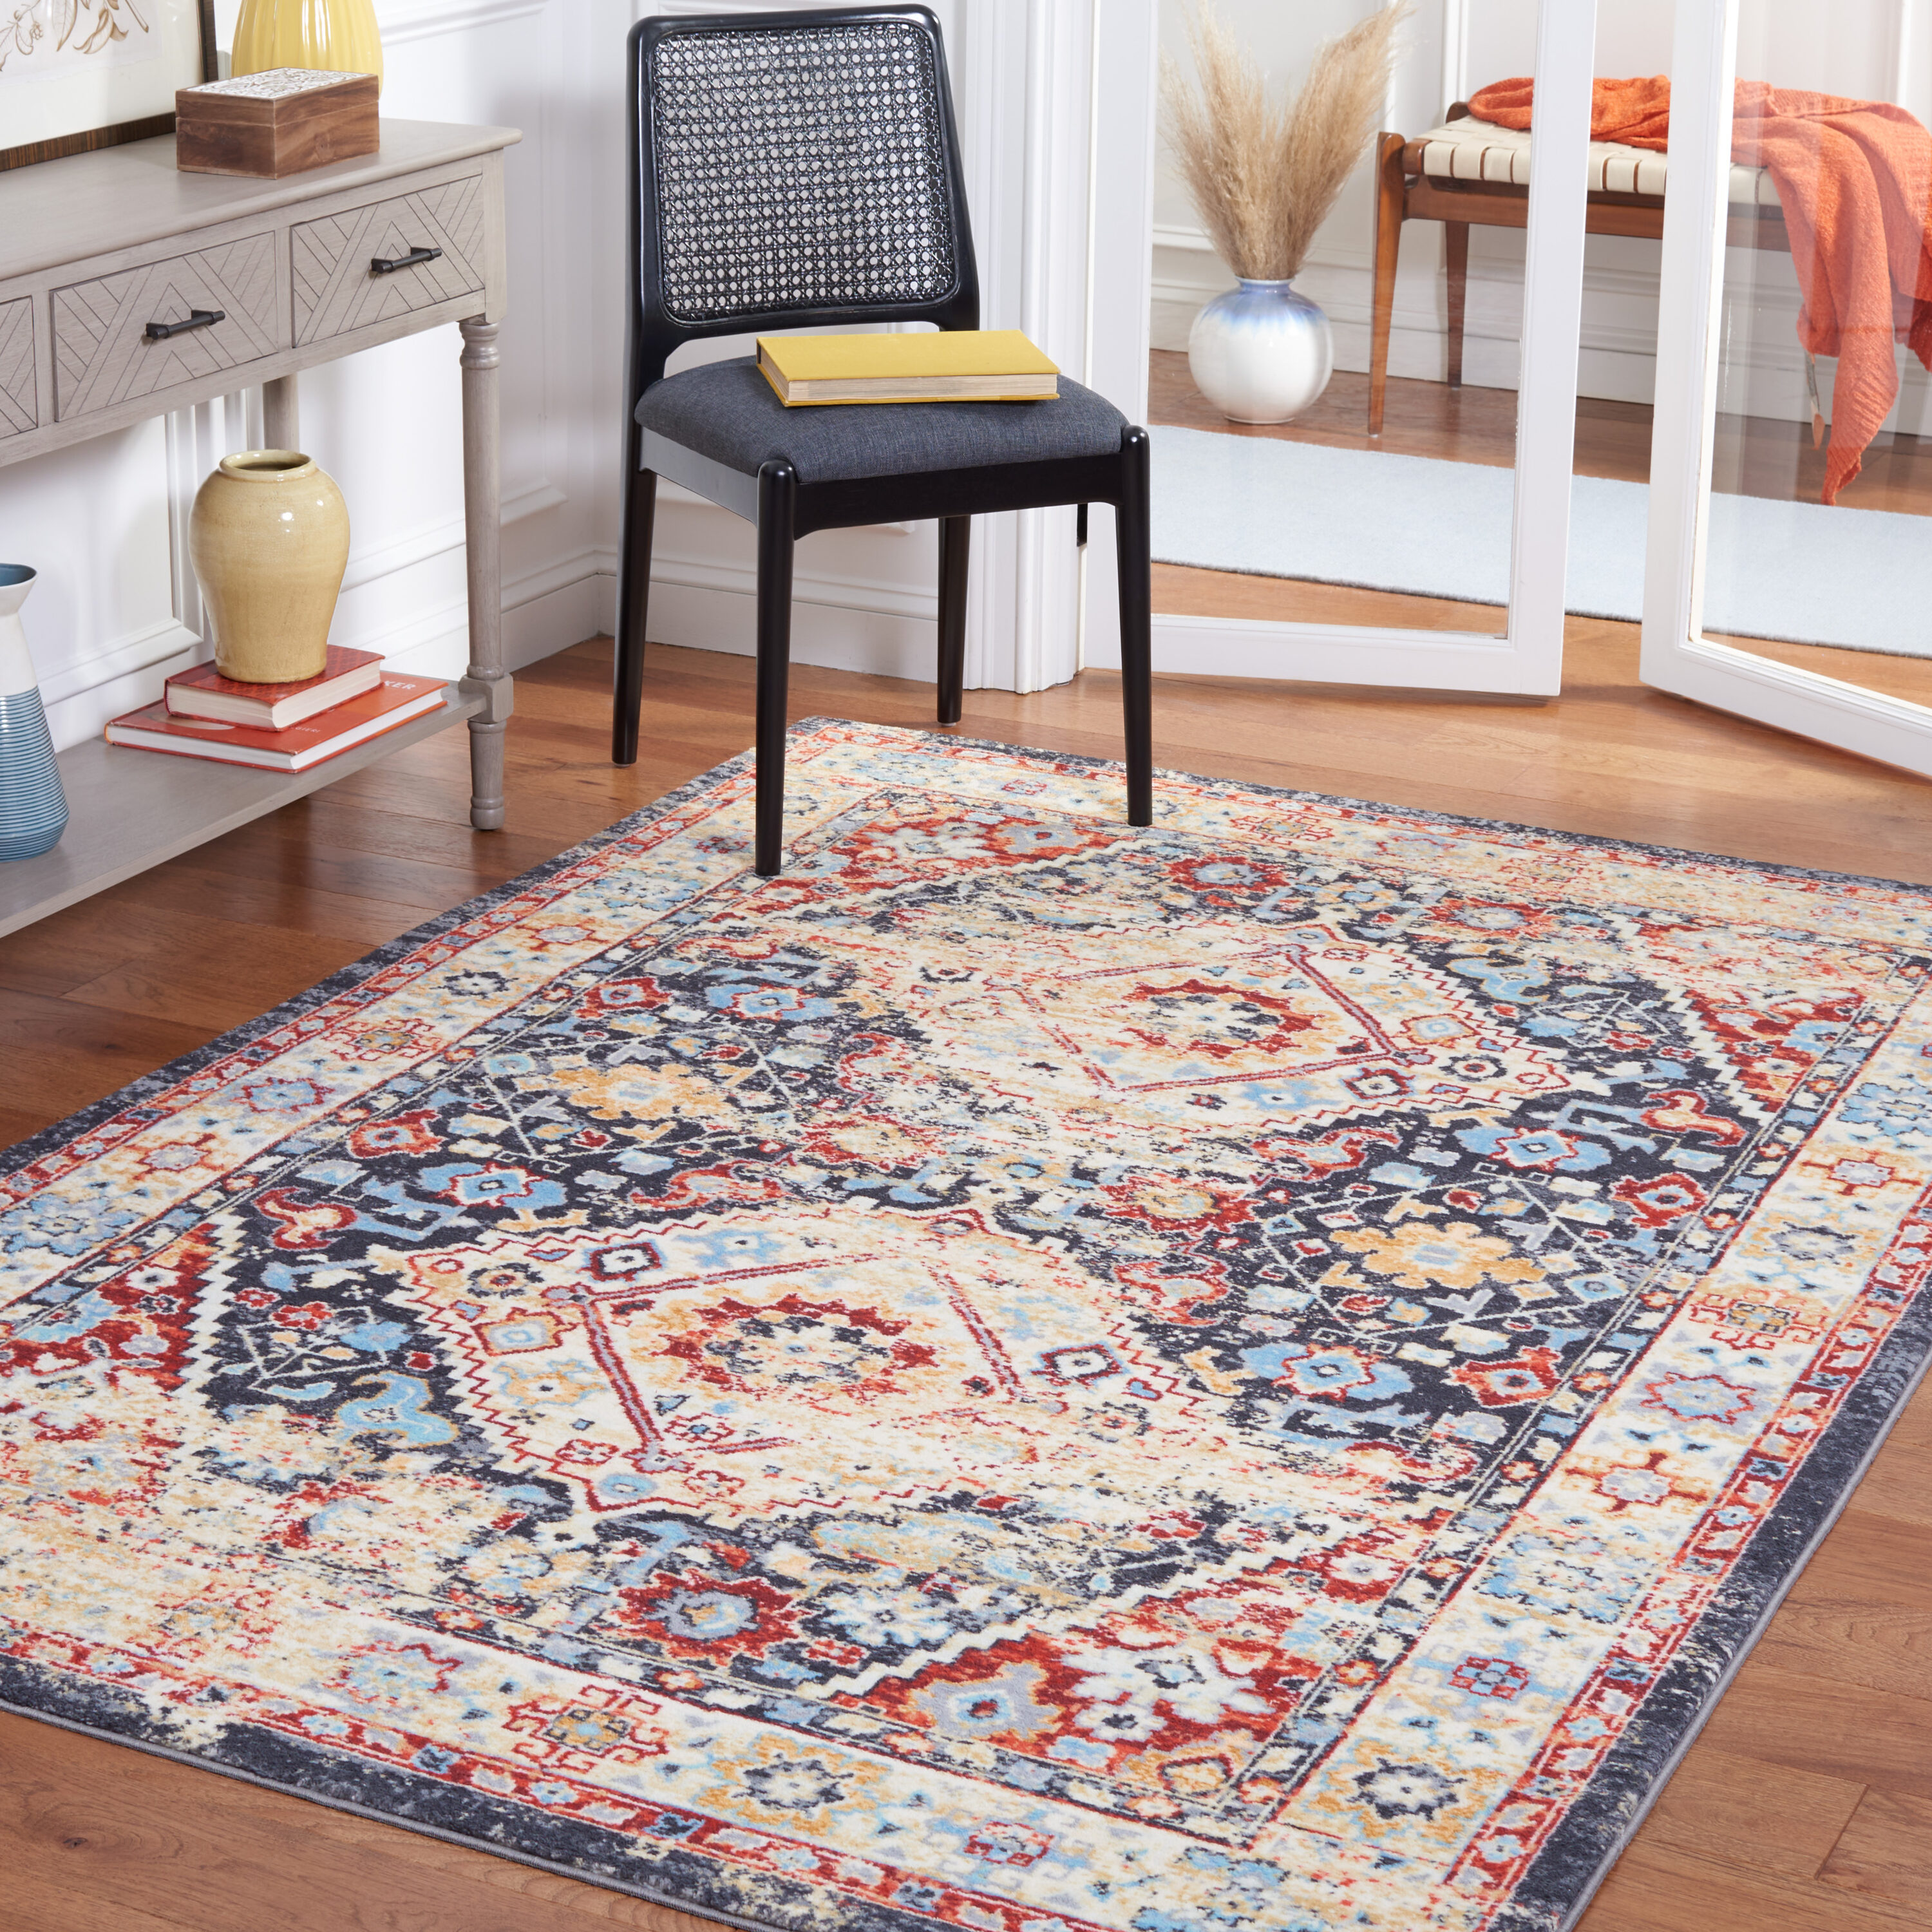 Riviera 8 X 10 Charcoal/Gold Indoor Border Machine Washable Area Rug Polyester in Off-White | - Safavieh RIV157H-8